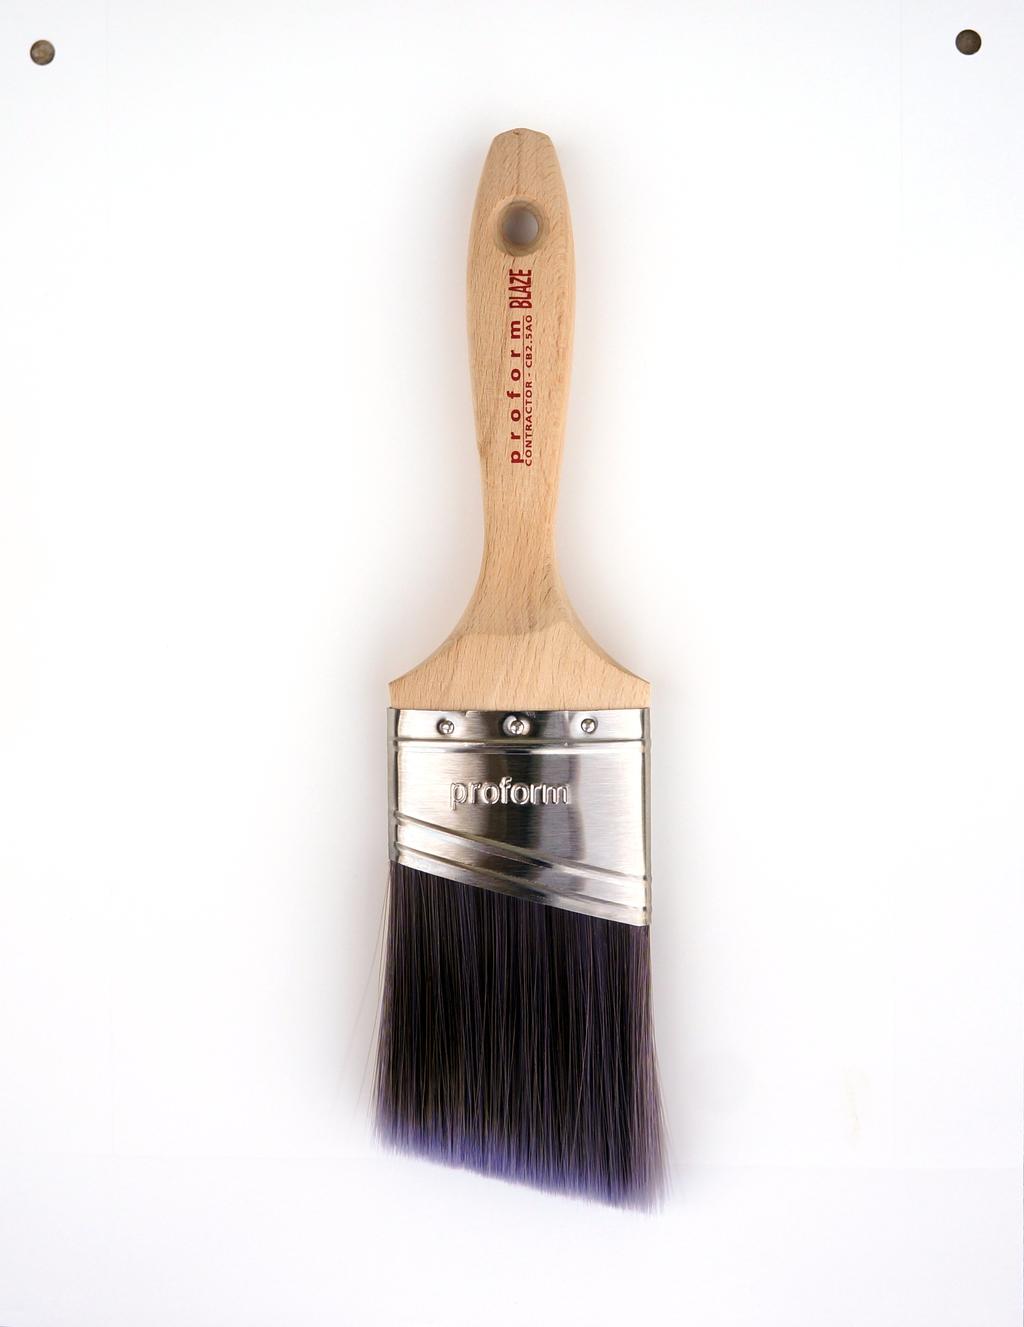 Proform Blaze CB-2.5 Proform is THE leader in innovative paint brush design and technology. The BLAZE series of brushes incorporate oval ferrules with premium performance filaments.